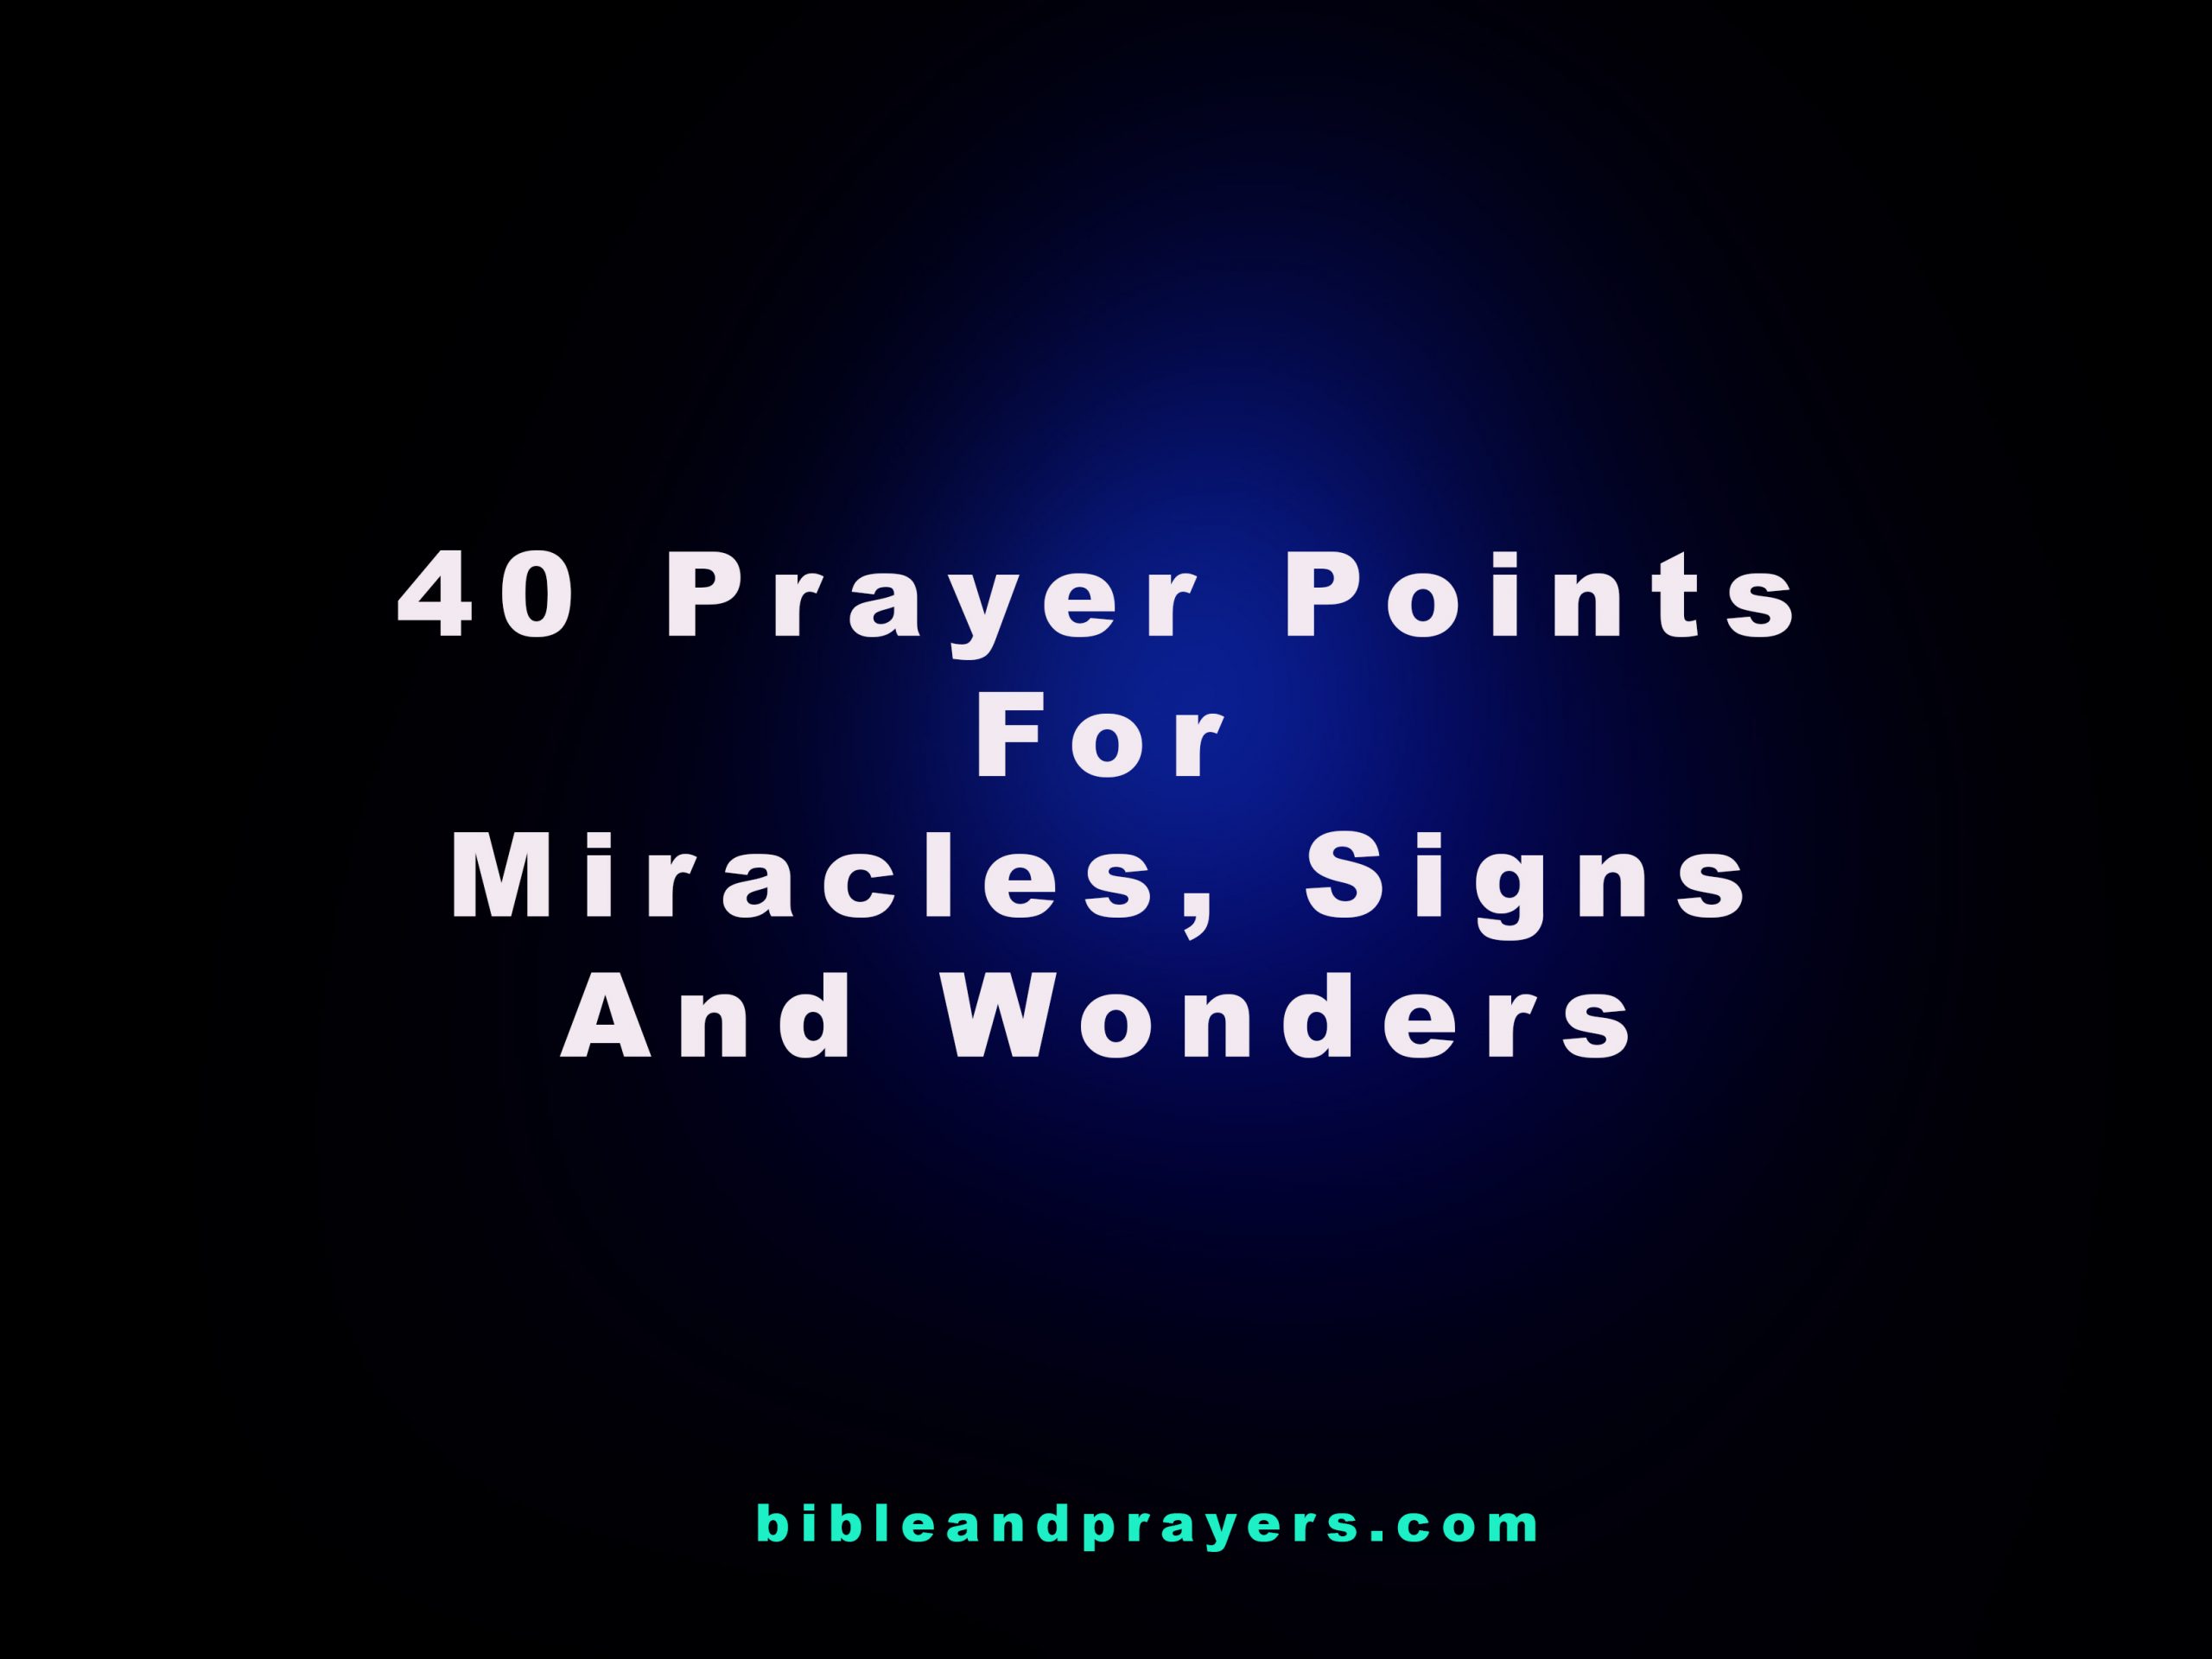 40 Prayers For Miracles, Signs And Wonders